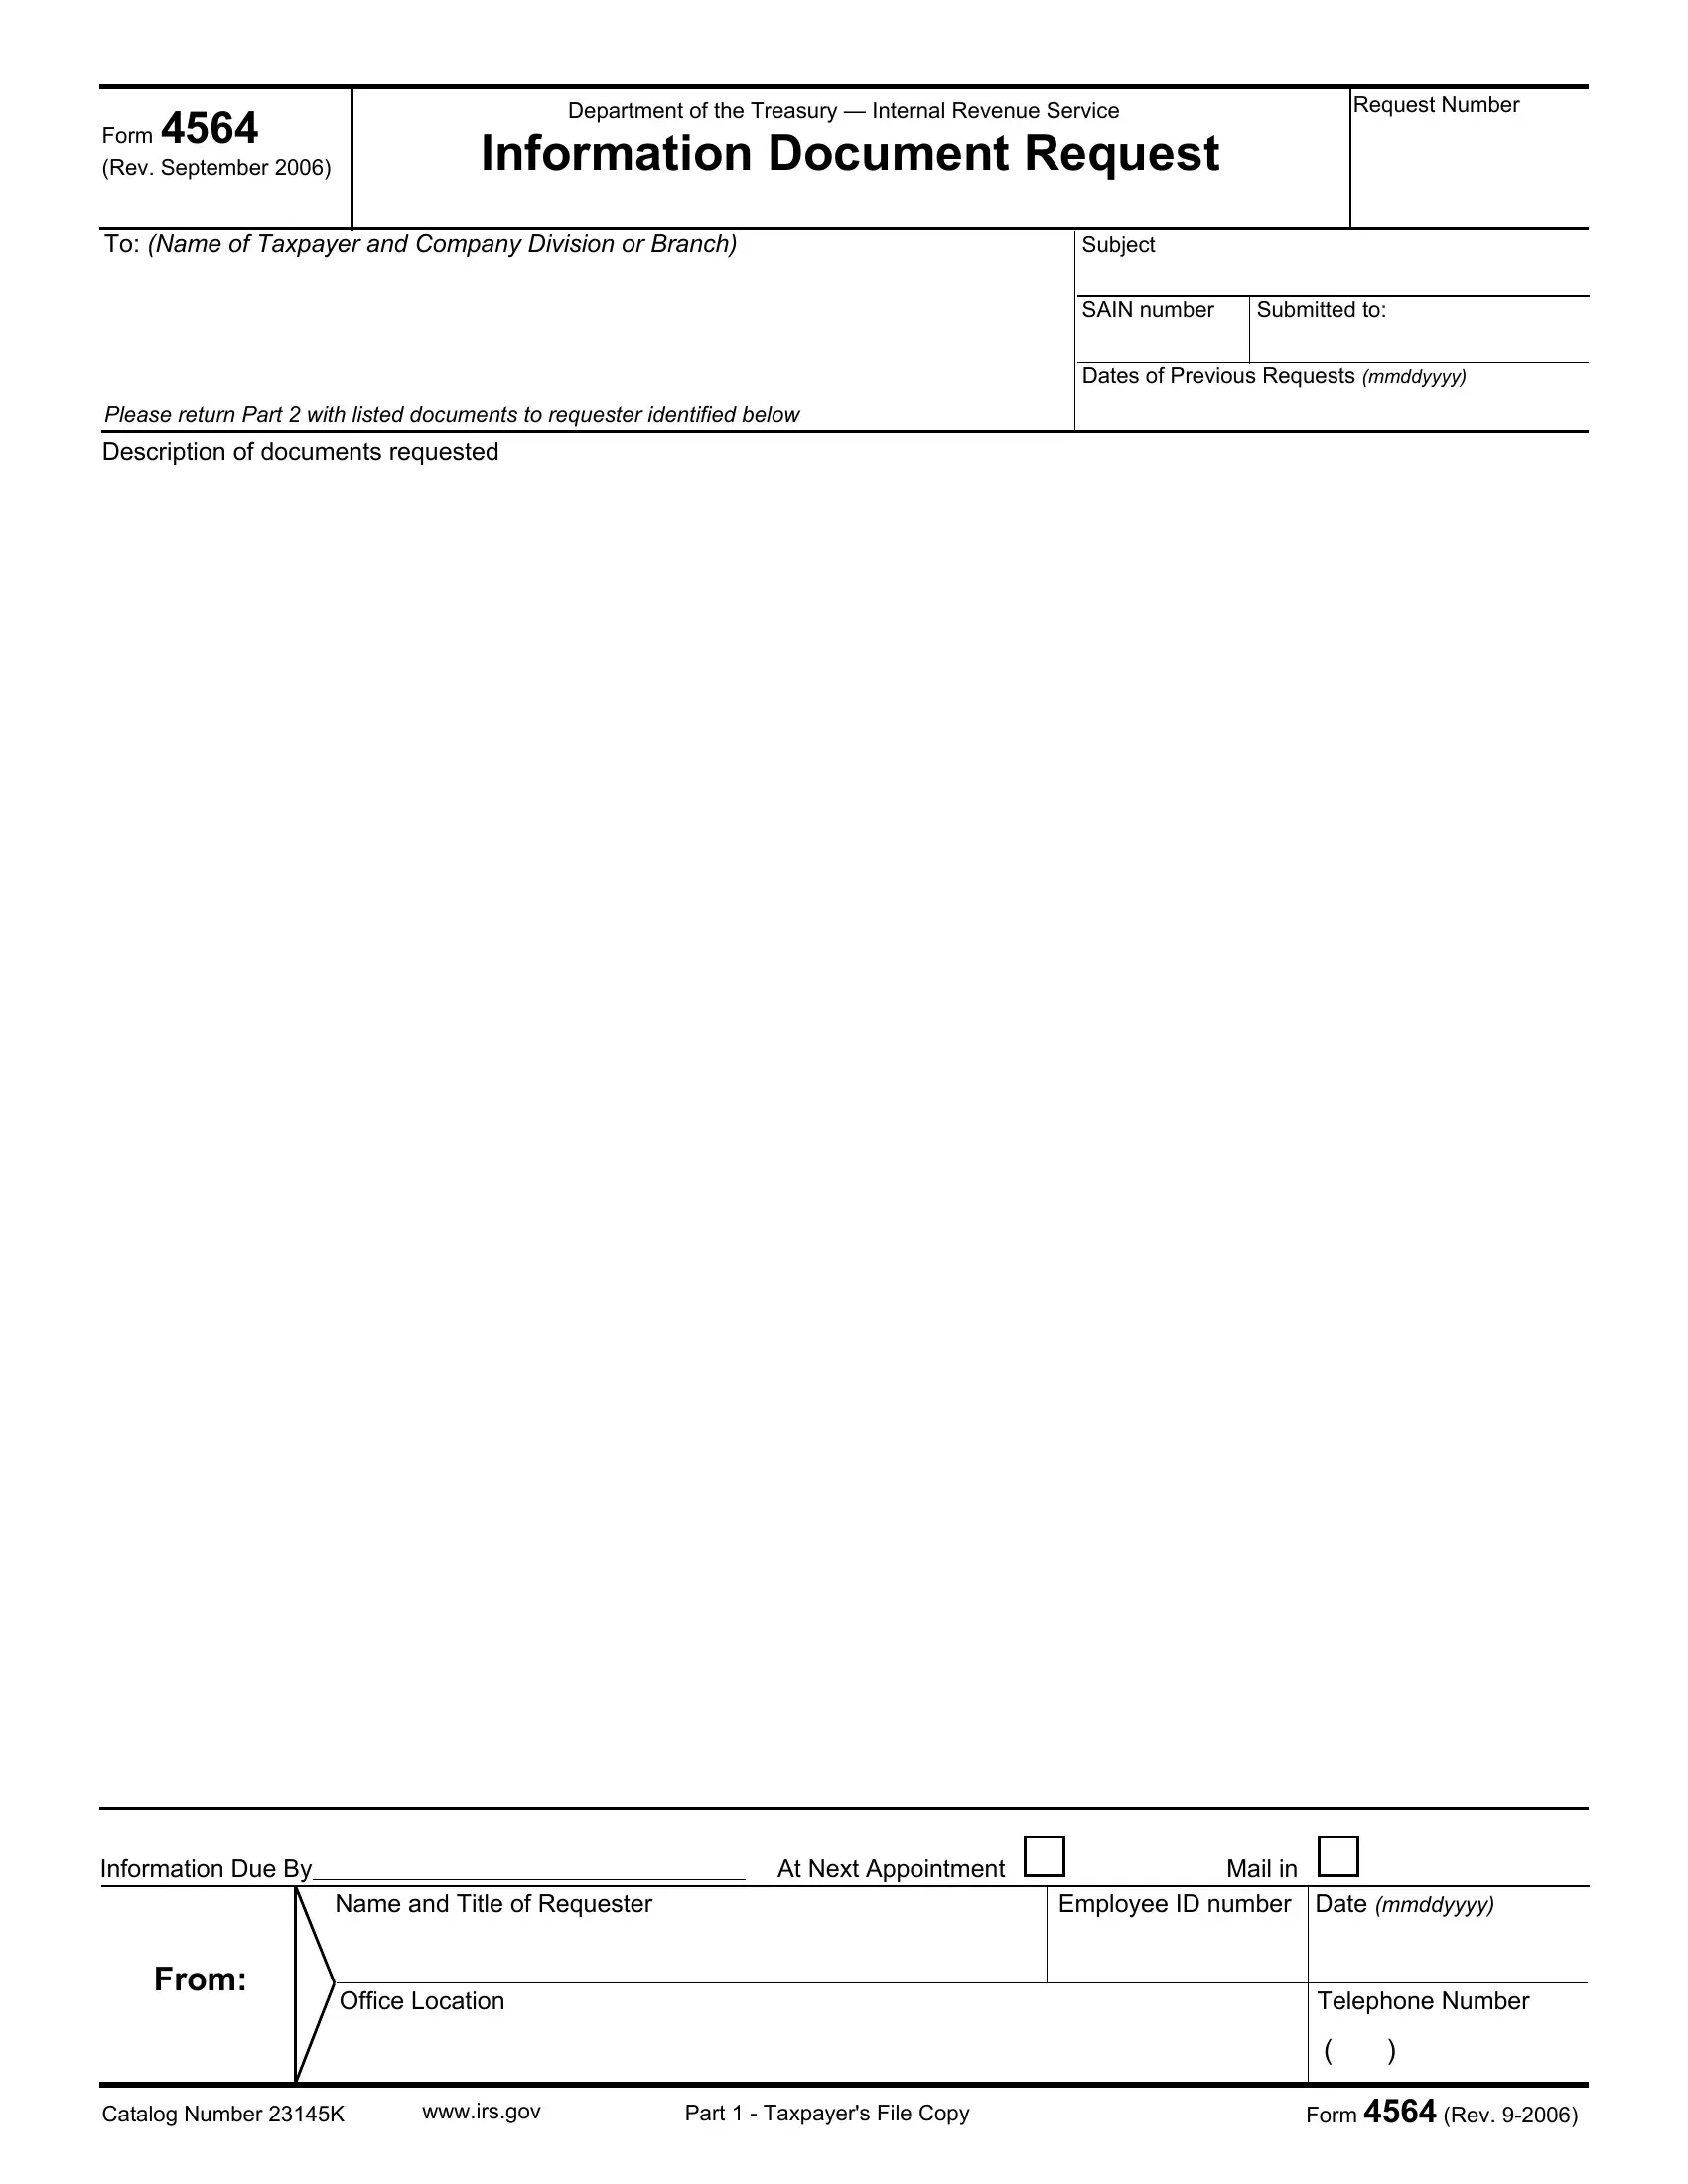 form-4564-fill-out-printable-pdf-forms-online